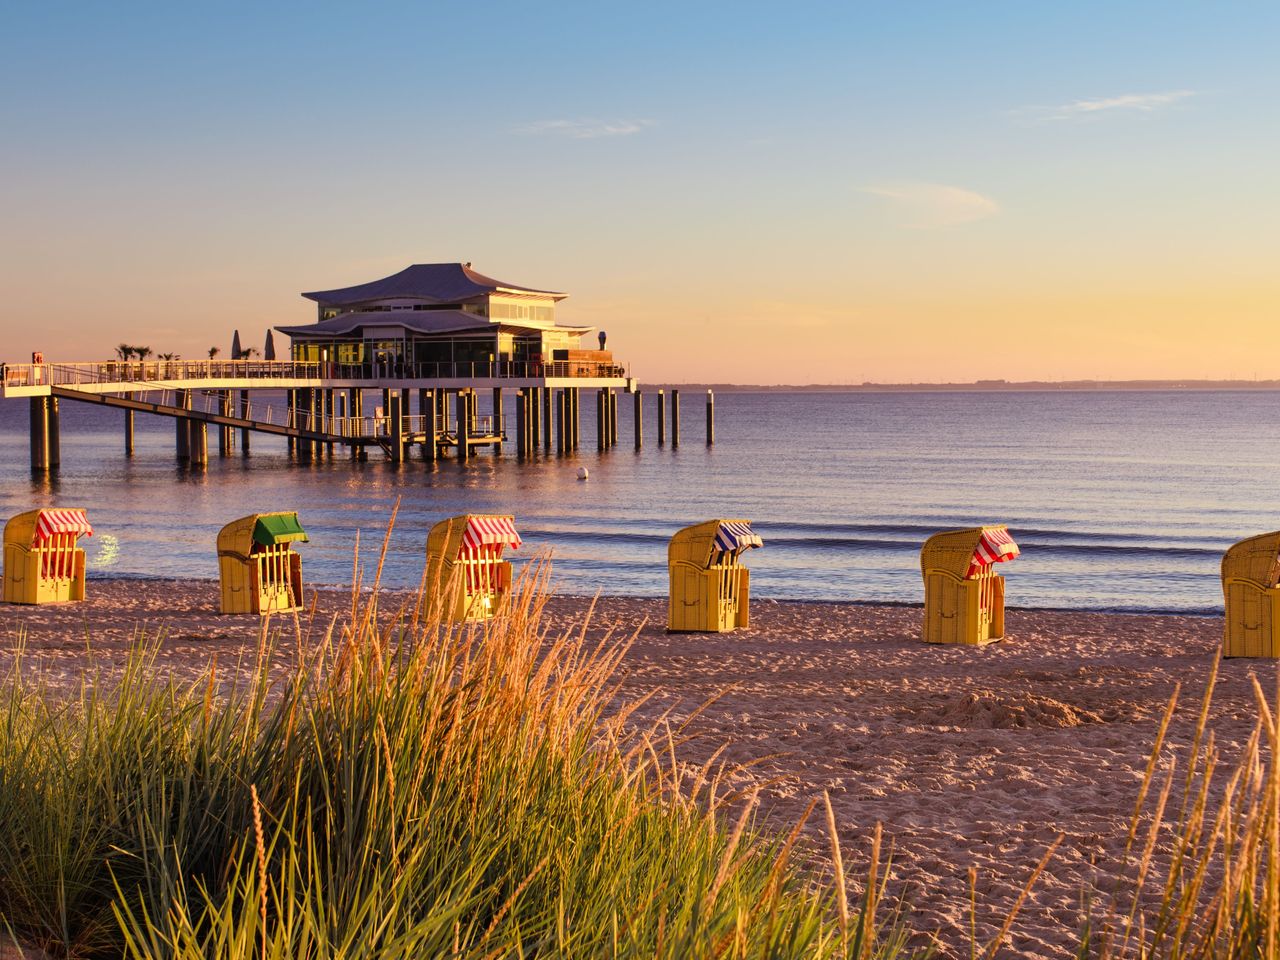 Ostsee - Sommer - Special I 10 Tage Ostsee Momente